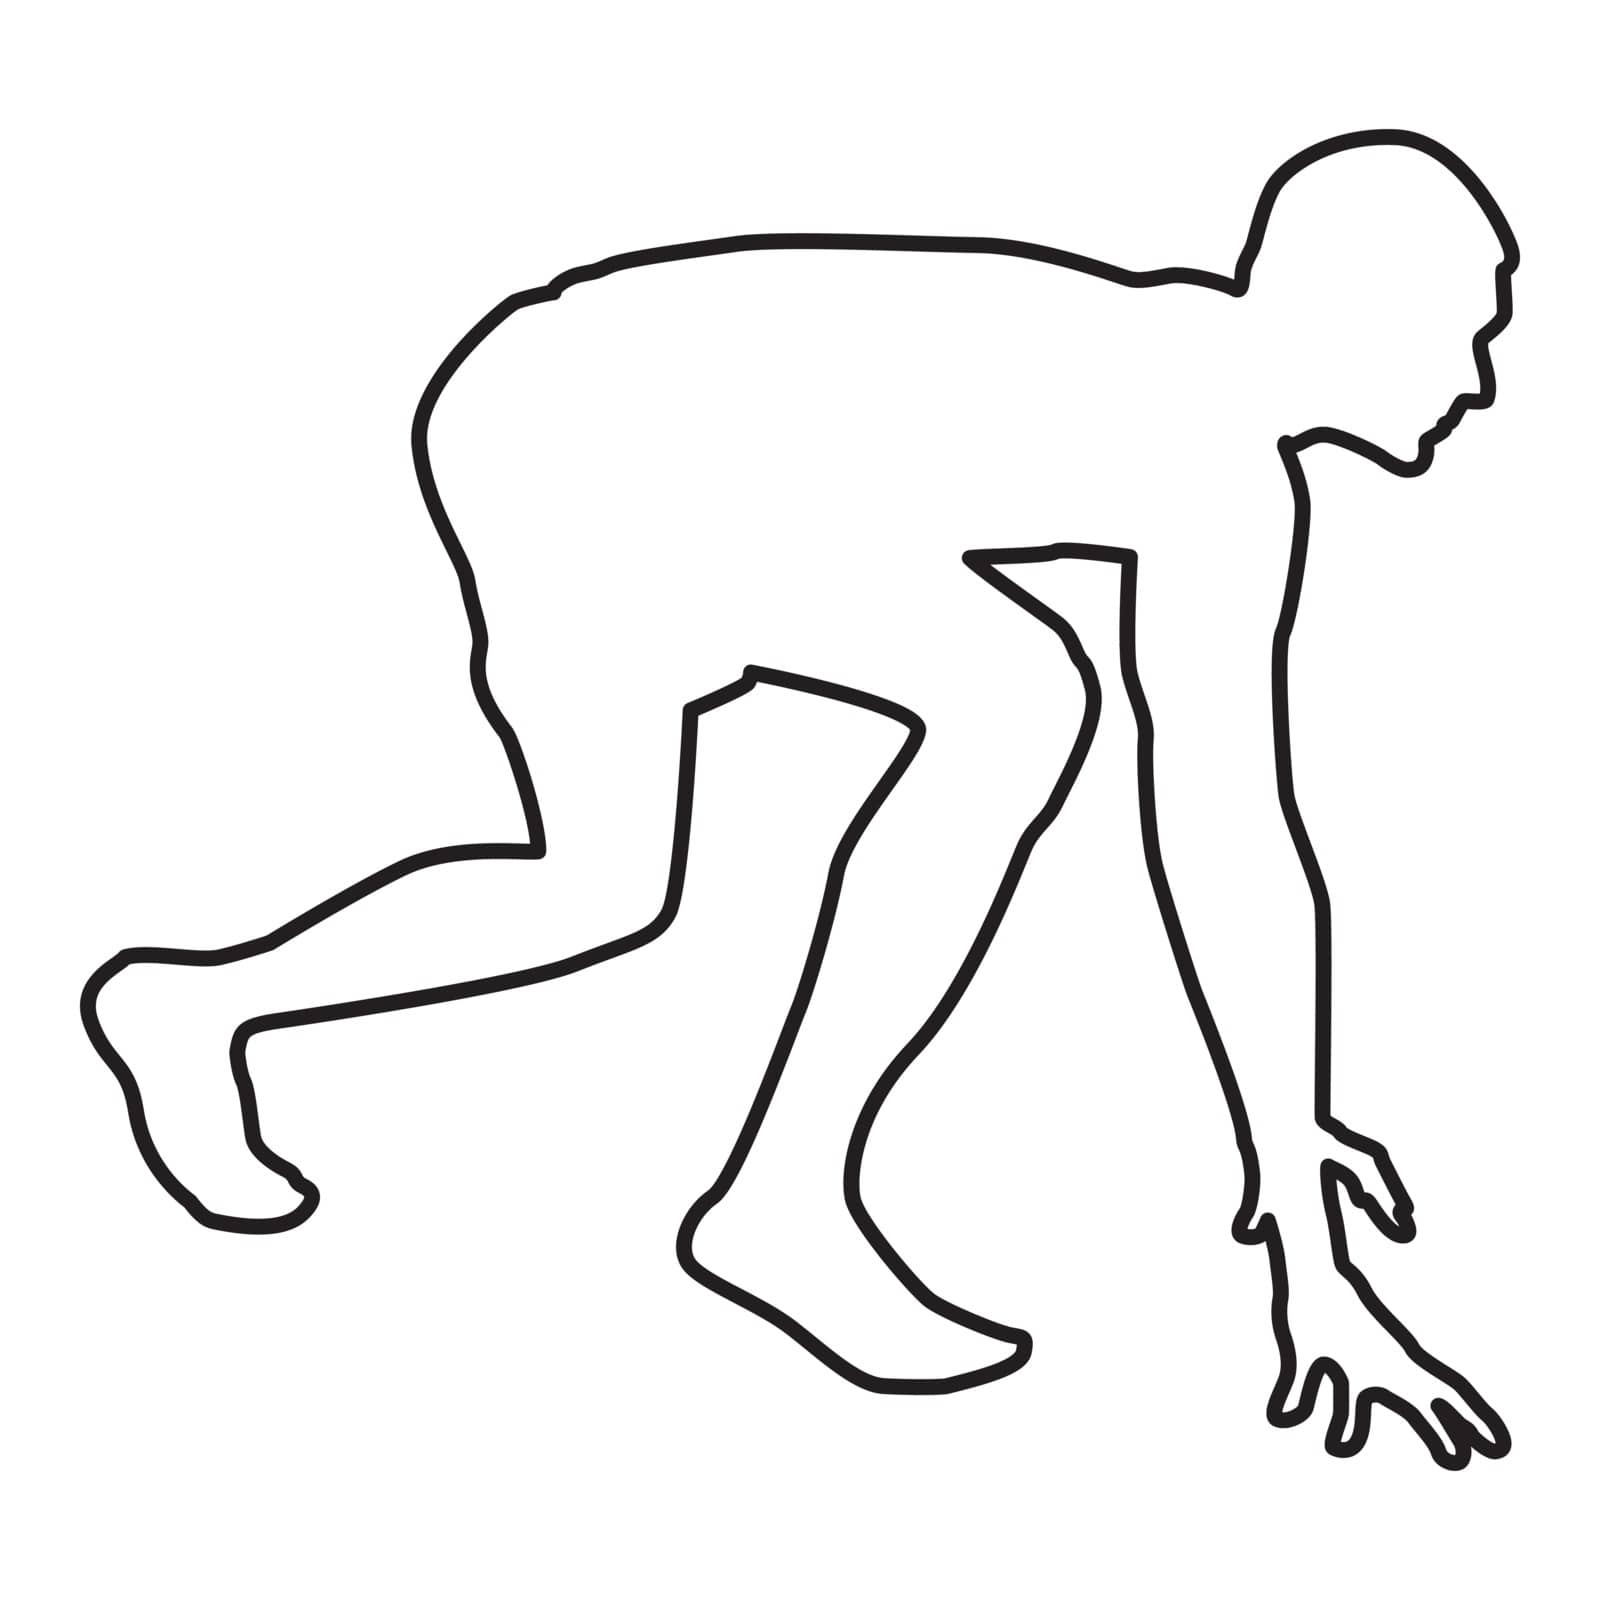 Runner preparing to start running Start running Runner in ready posture to sprint silhouette Ready to start icon black color vector illustration flat style simple image outline